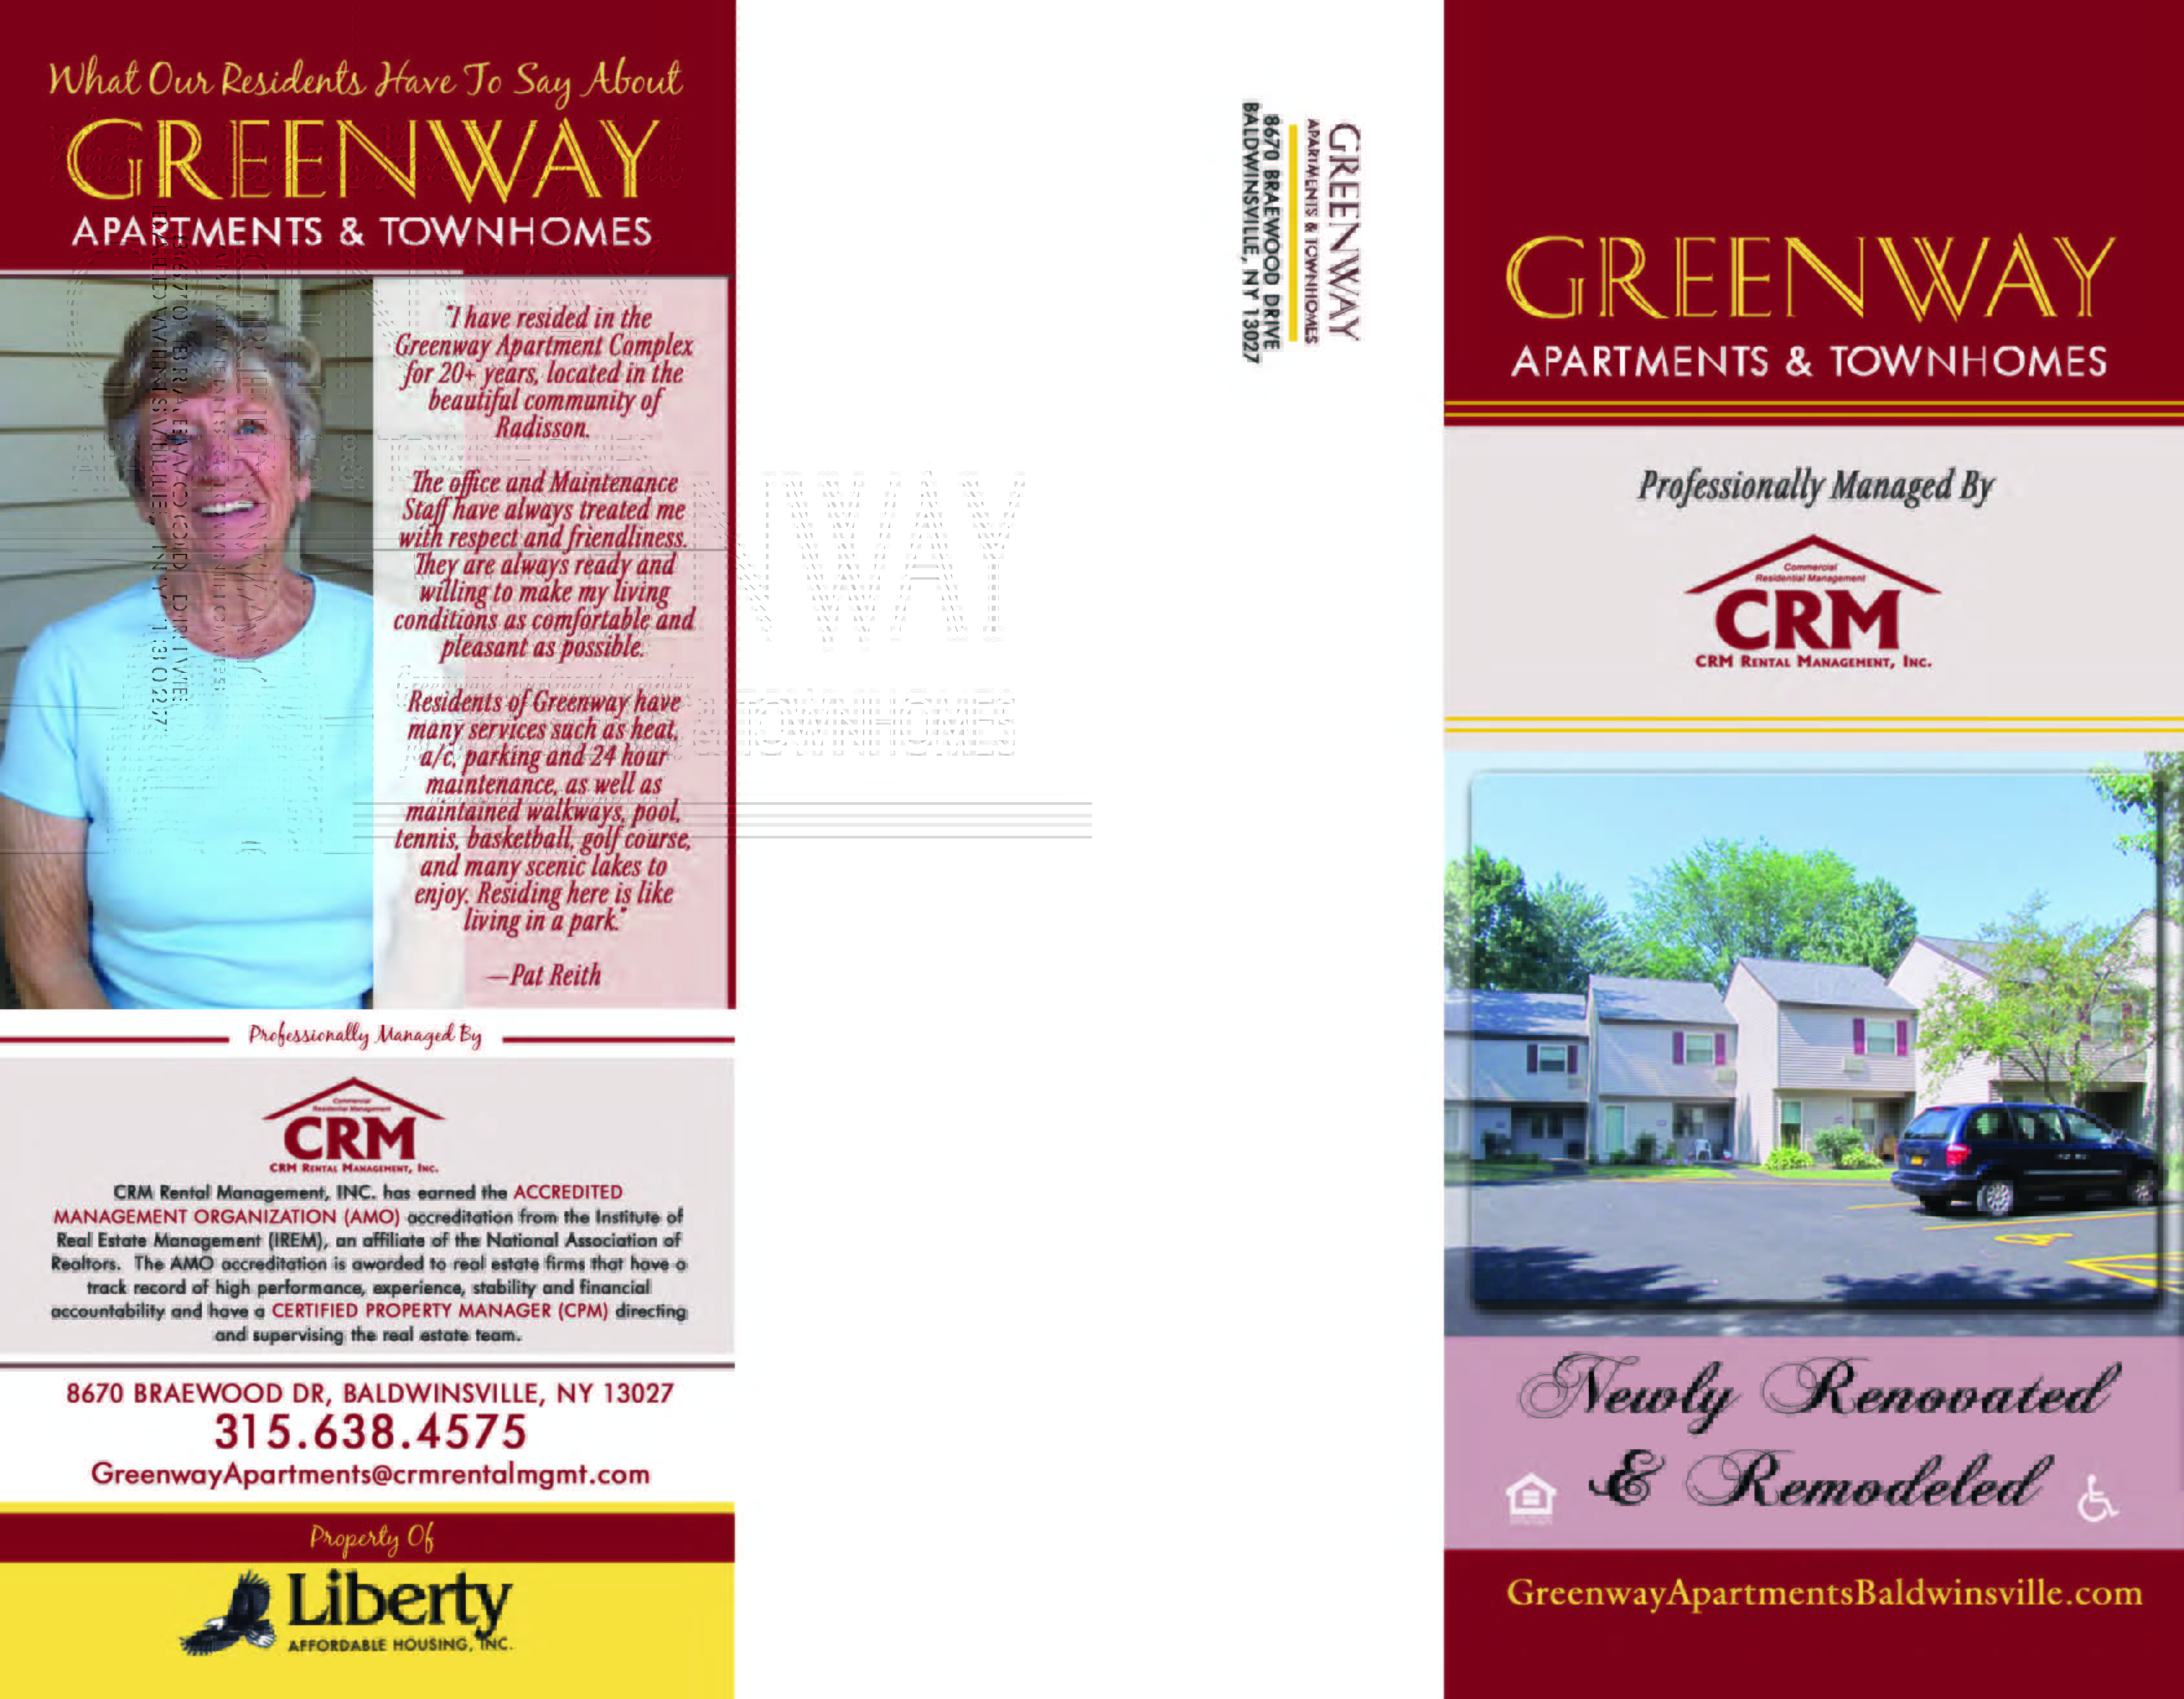 Greenway Brochure Page 1 of 2